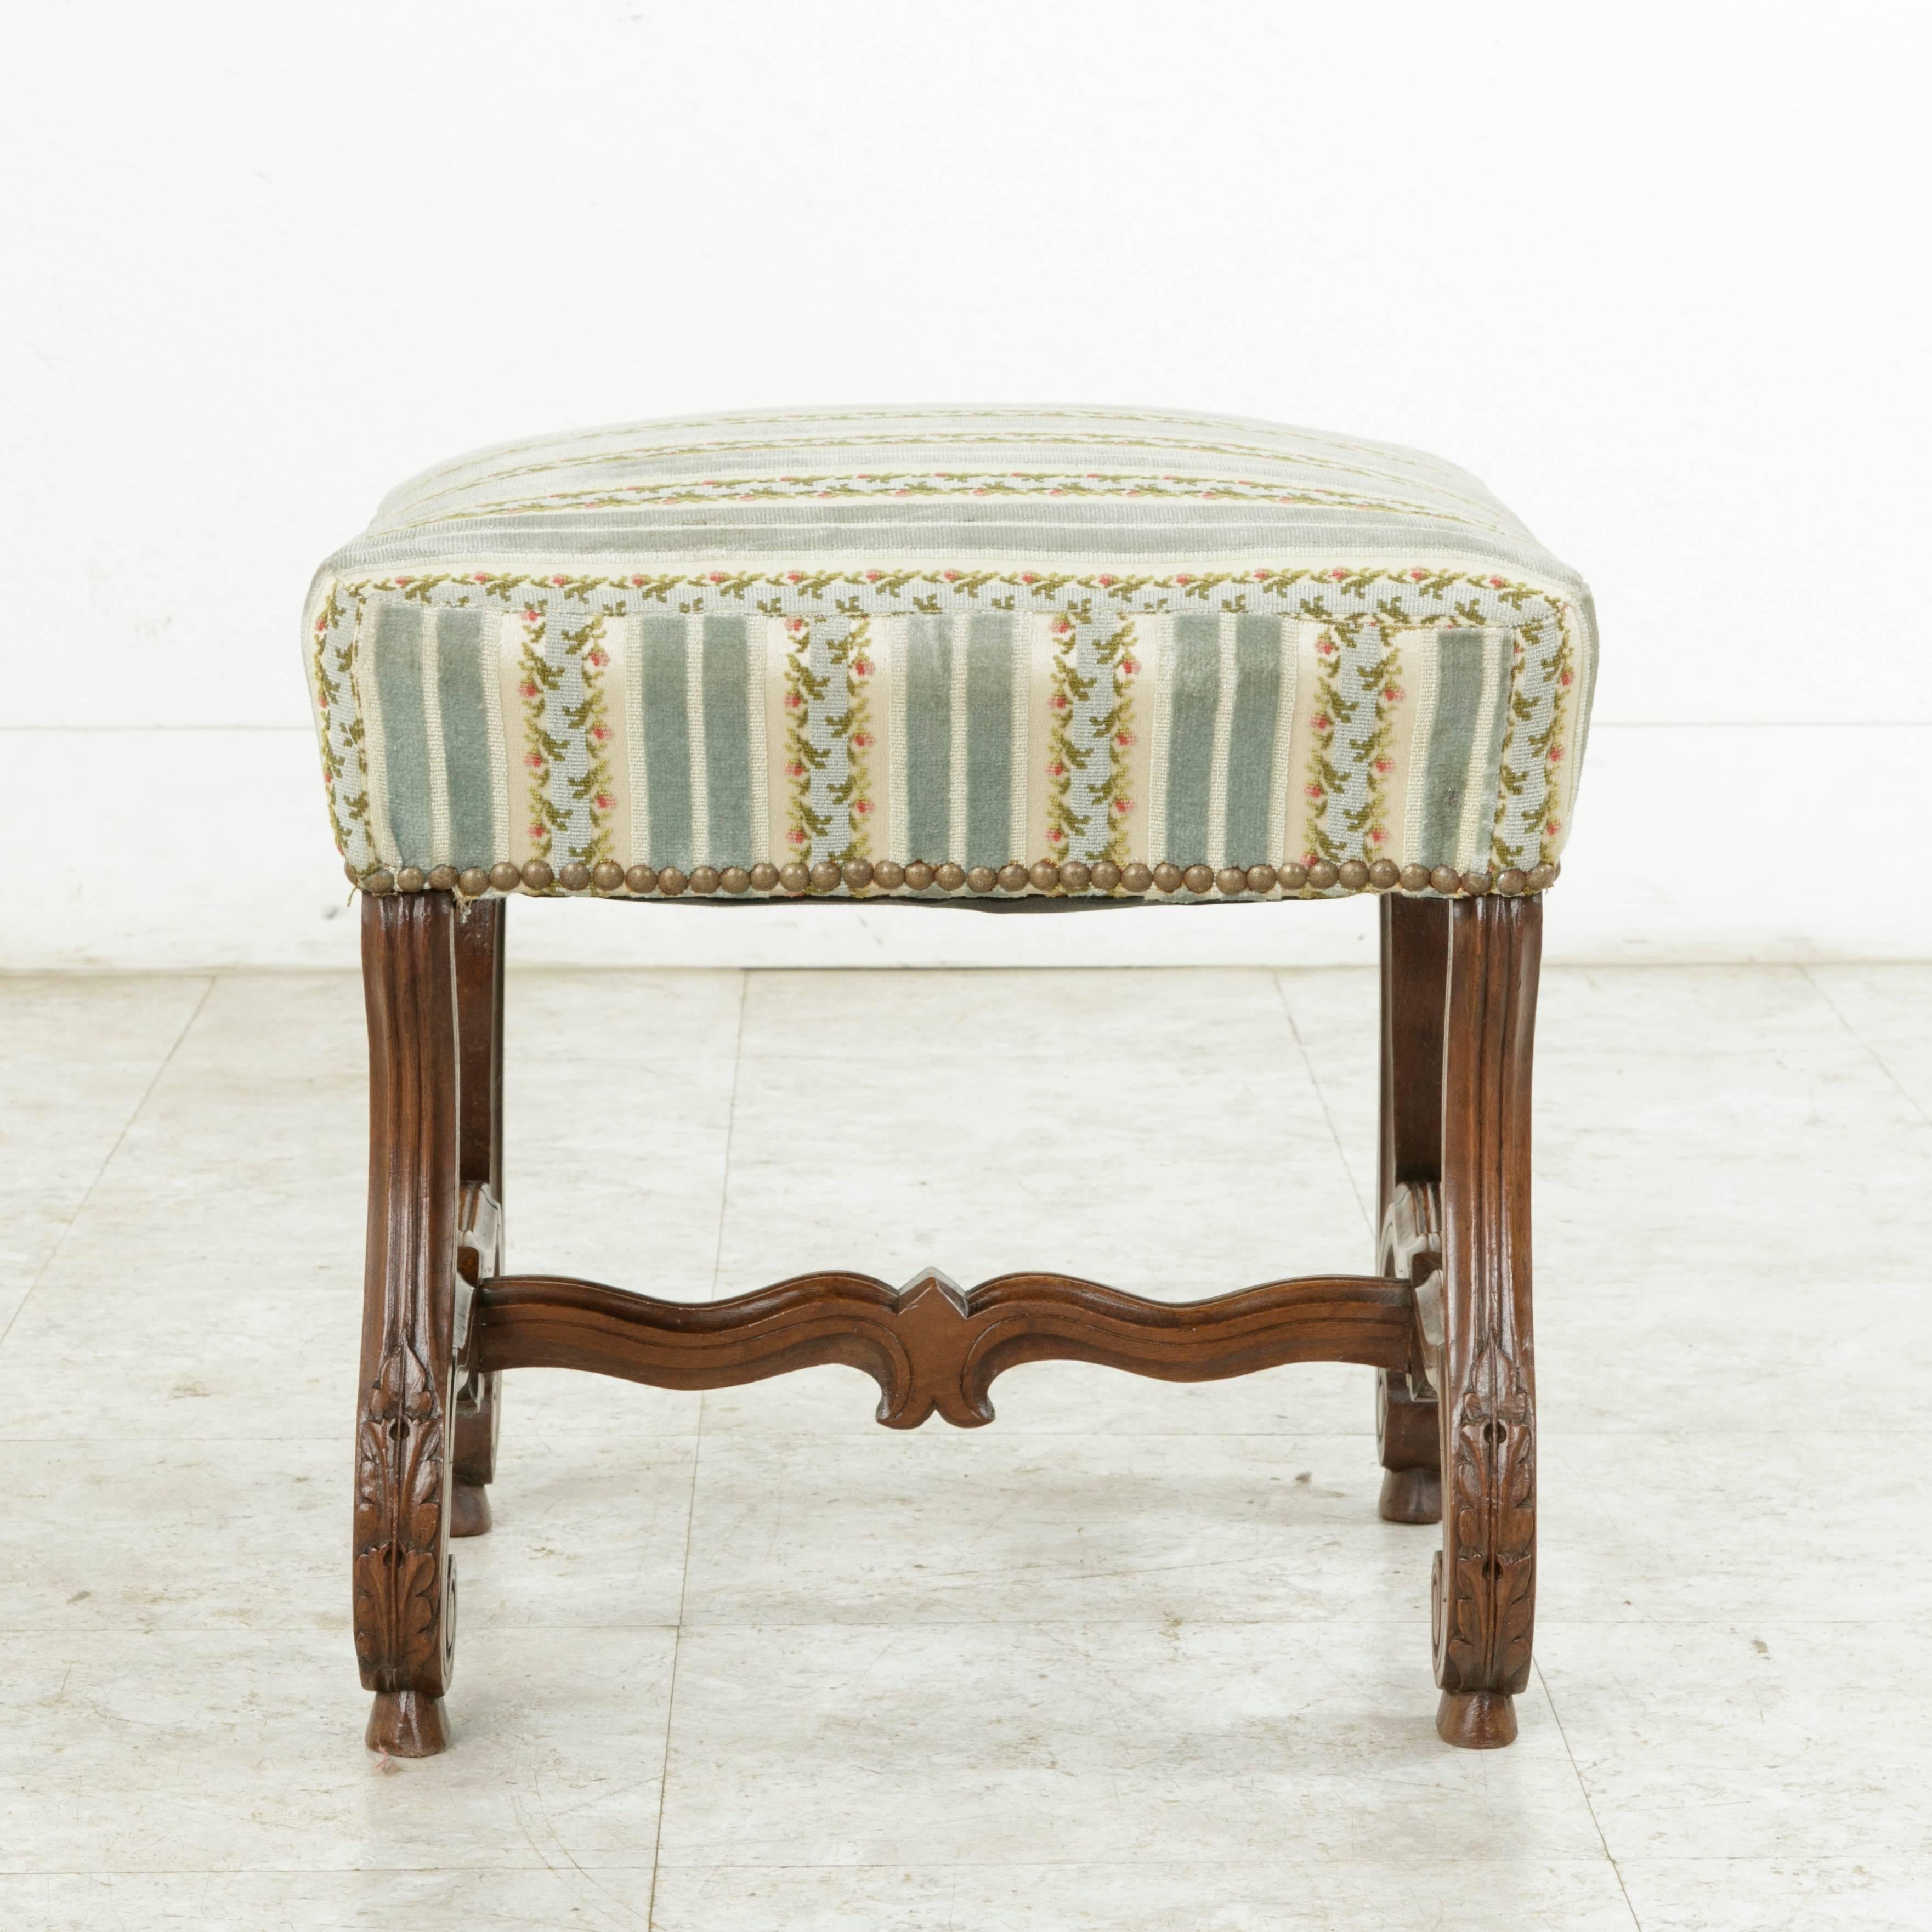 Late 19th Century French Louis XIV Style Hand-Carved Walnut Vanity Bench, Stool 1